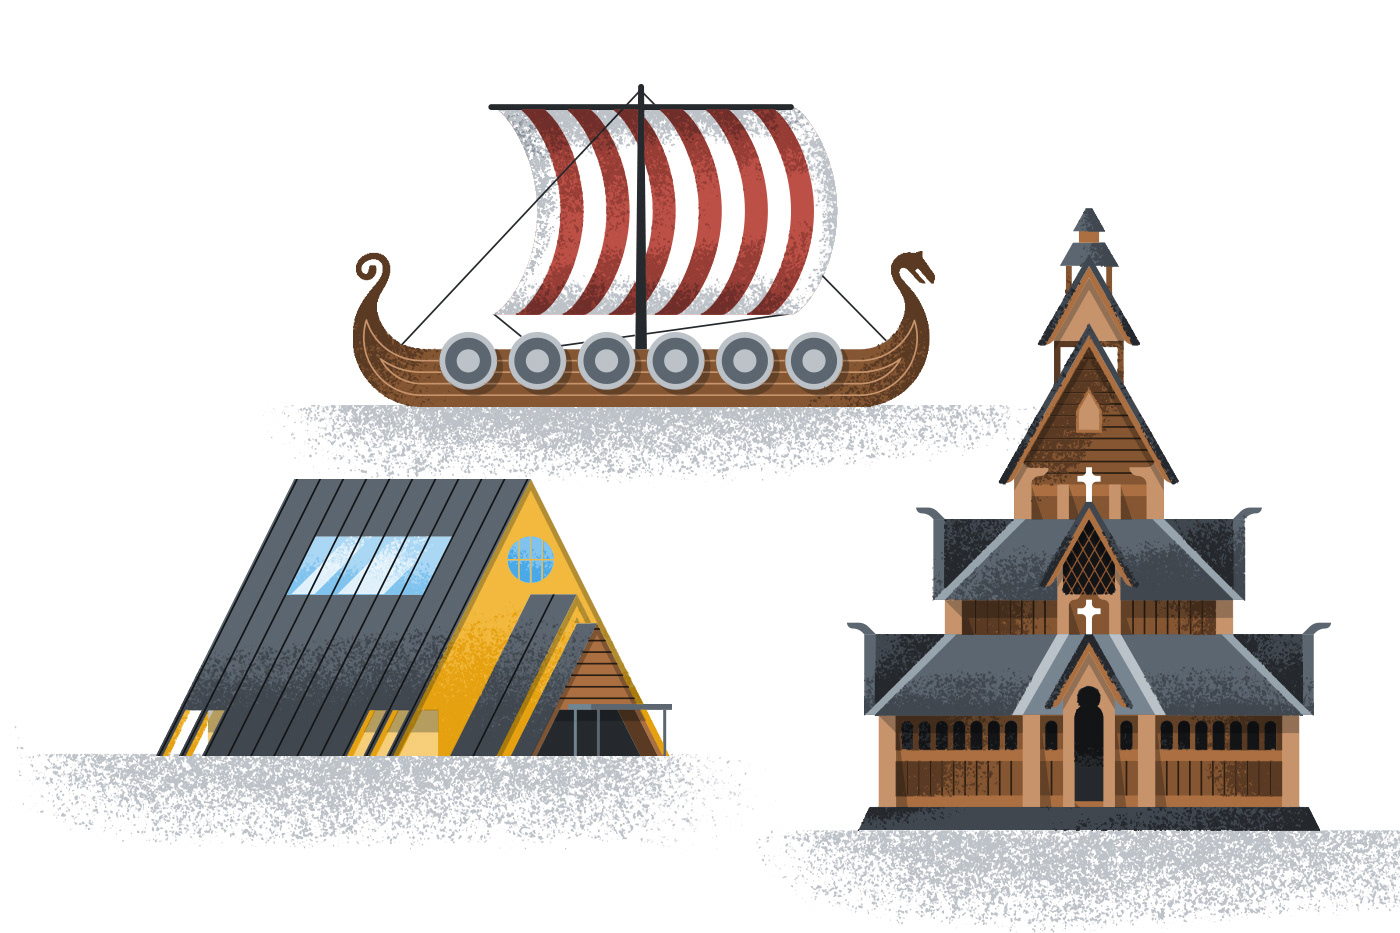 Illustrated icons of a viking ship, stave church and the polar museum of Oslo by Adrian Bauer